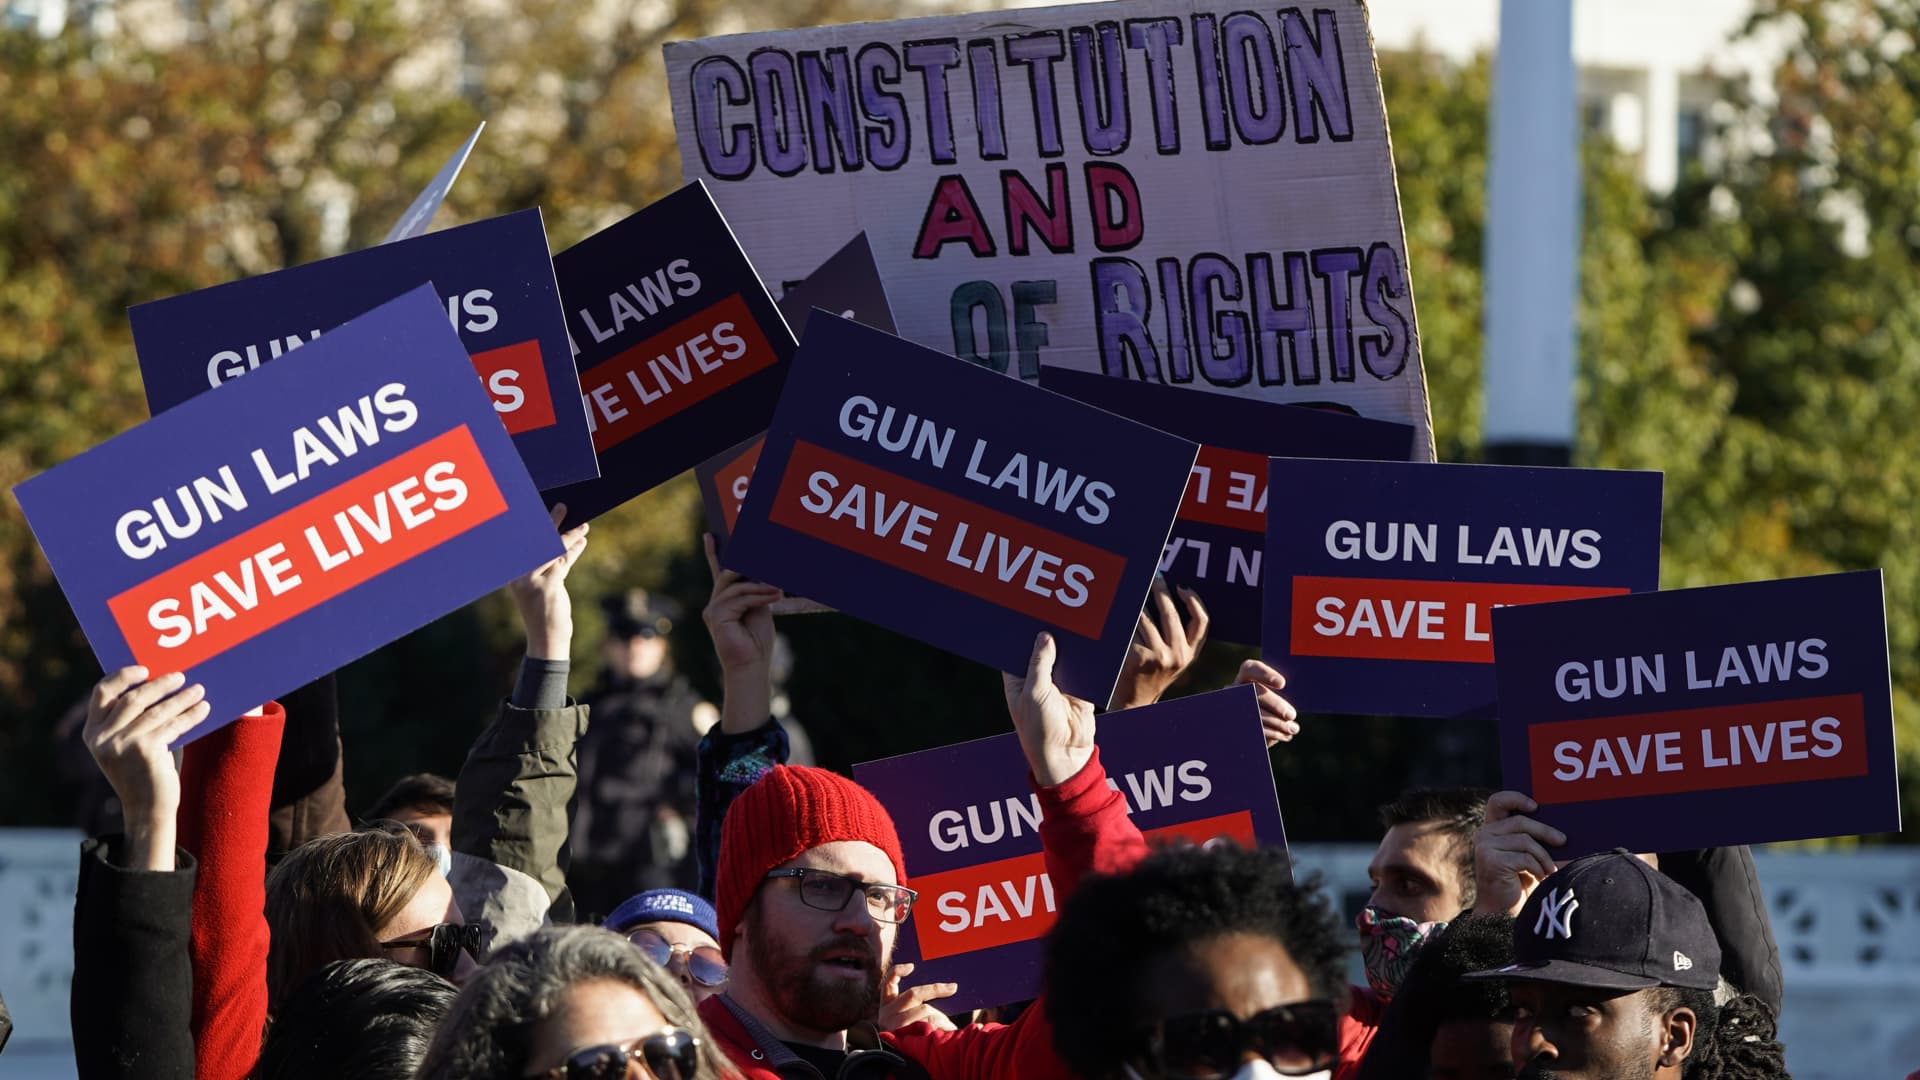 Supporters of gun control hold signs in front of supporters of gun rights during a demonstration by victims of gun violence in front of the Supreme Court as arguments begin in a major case on gun rights on November 3, 2021 in Washington, DC.